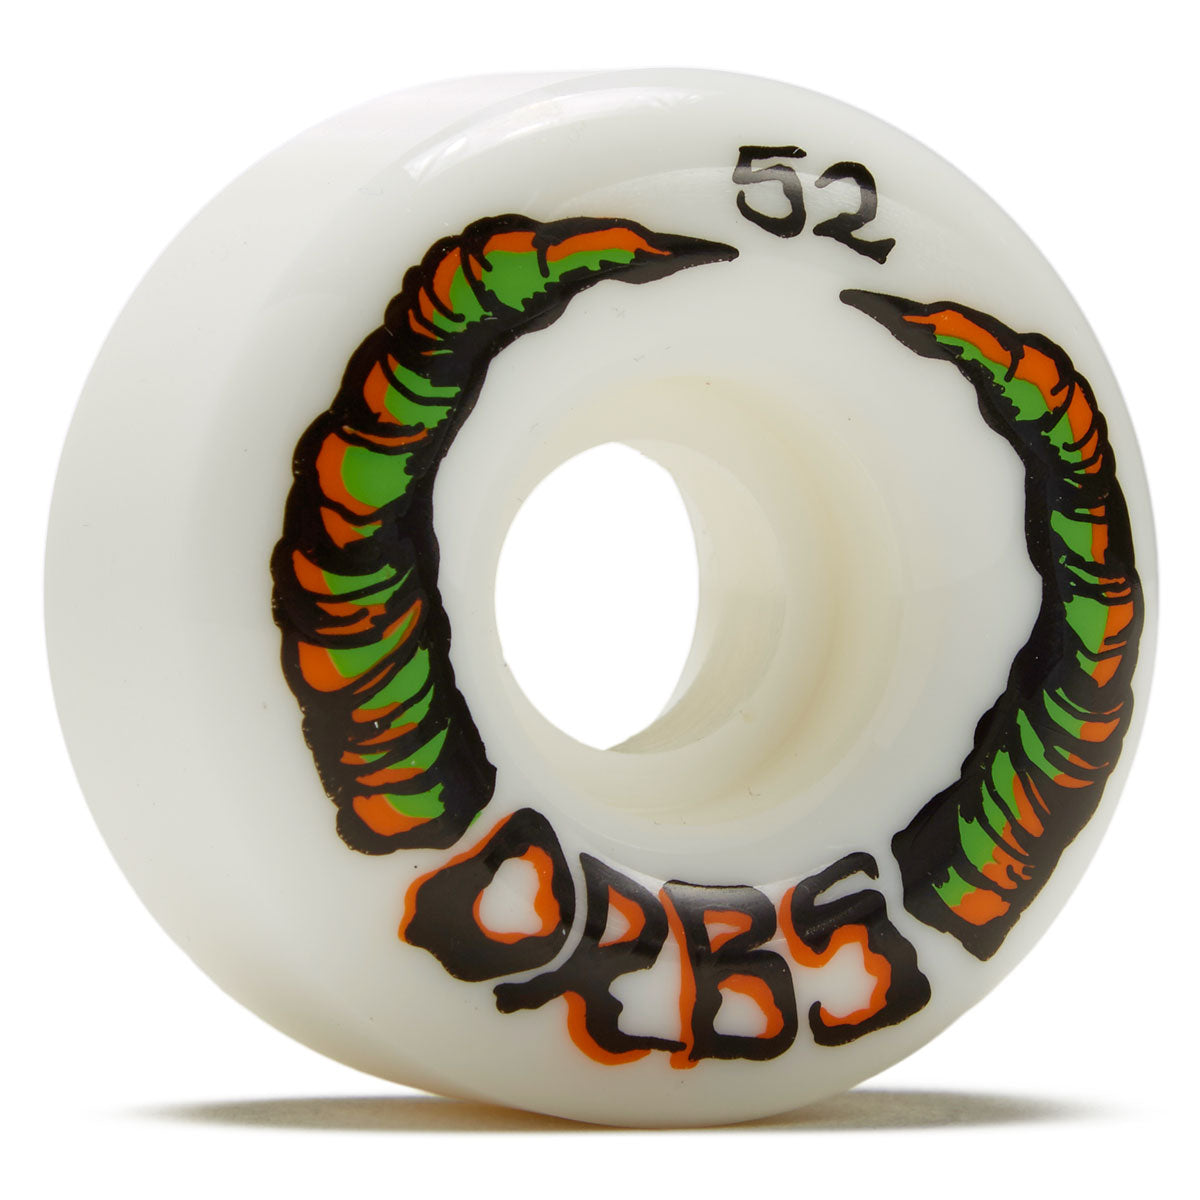 Welcome Orbs Apparitions Round 99A Skateboard Wheels - White - 52mm image 1